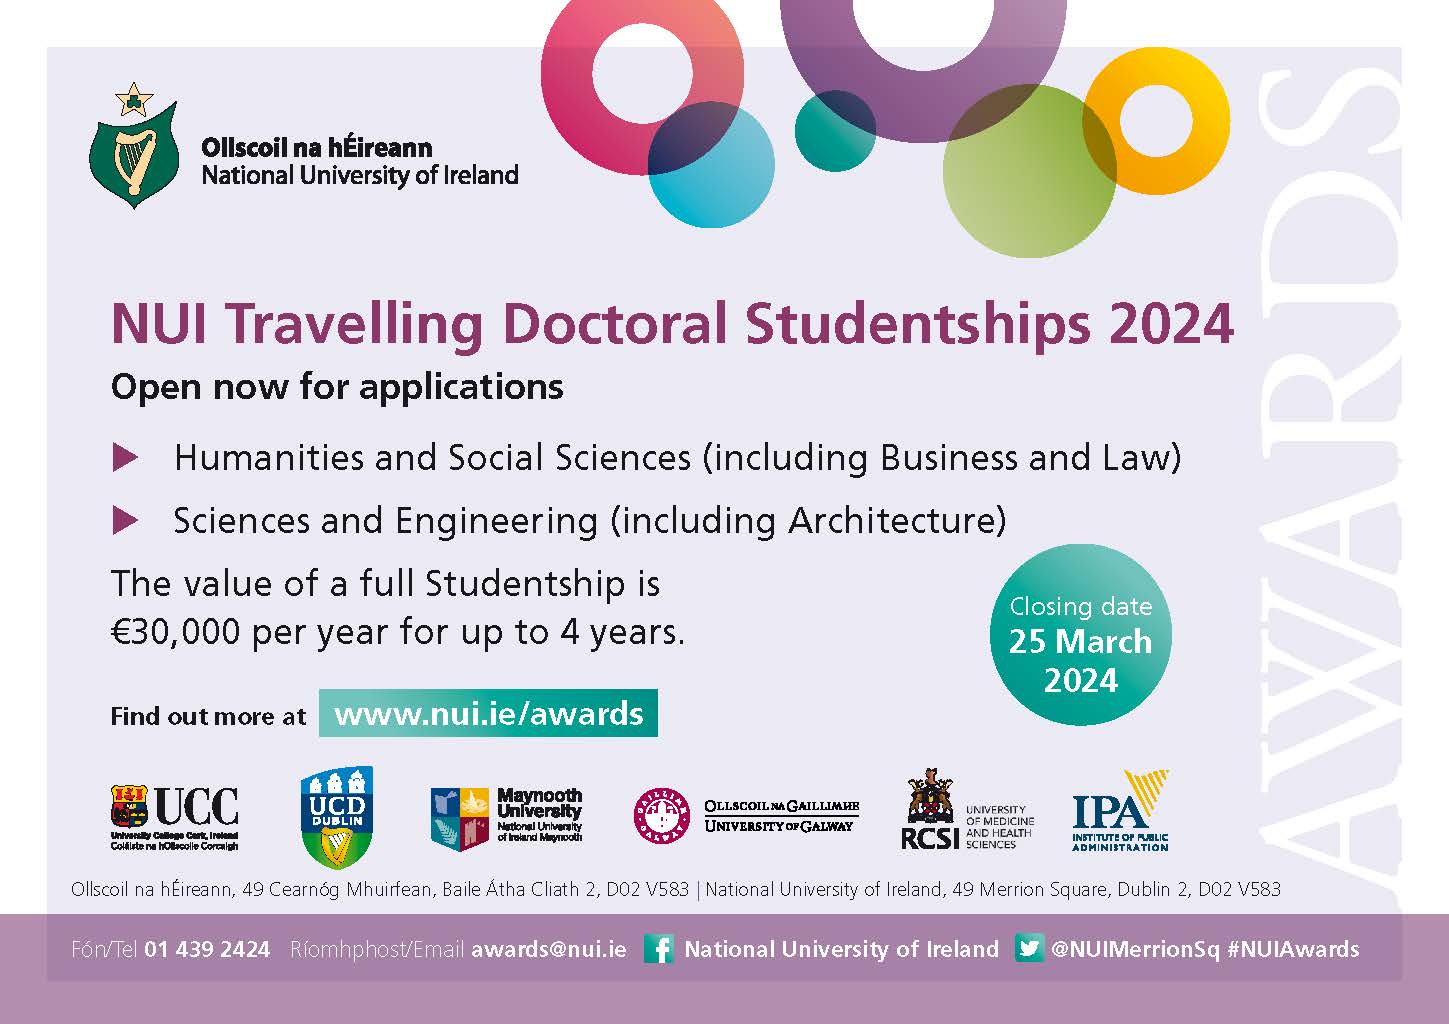 NUI Travelling Doctoral Studentships 2024